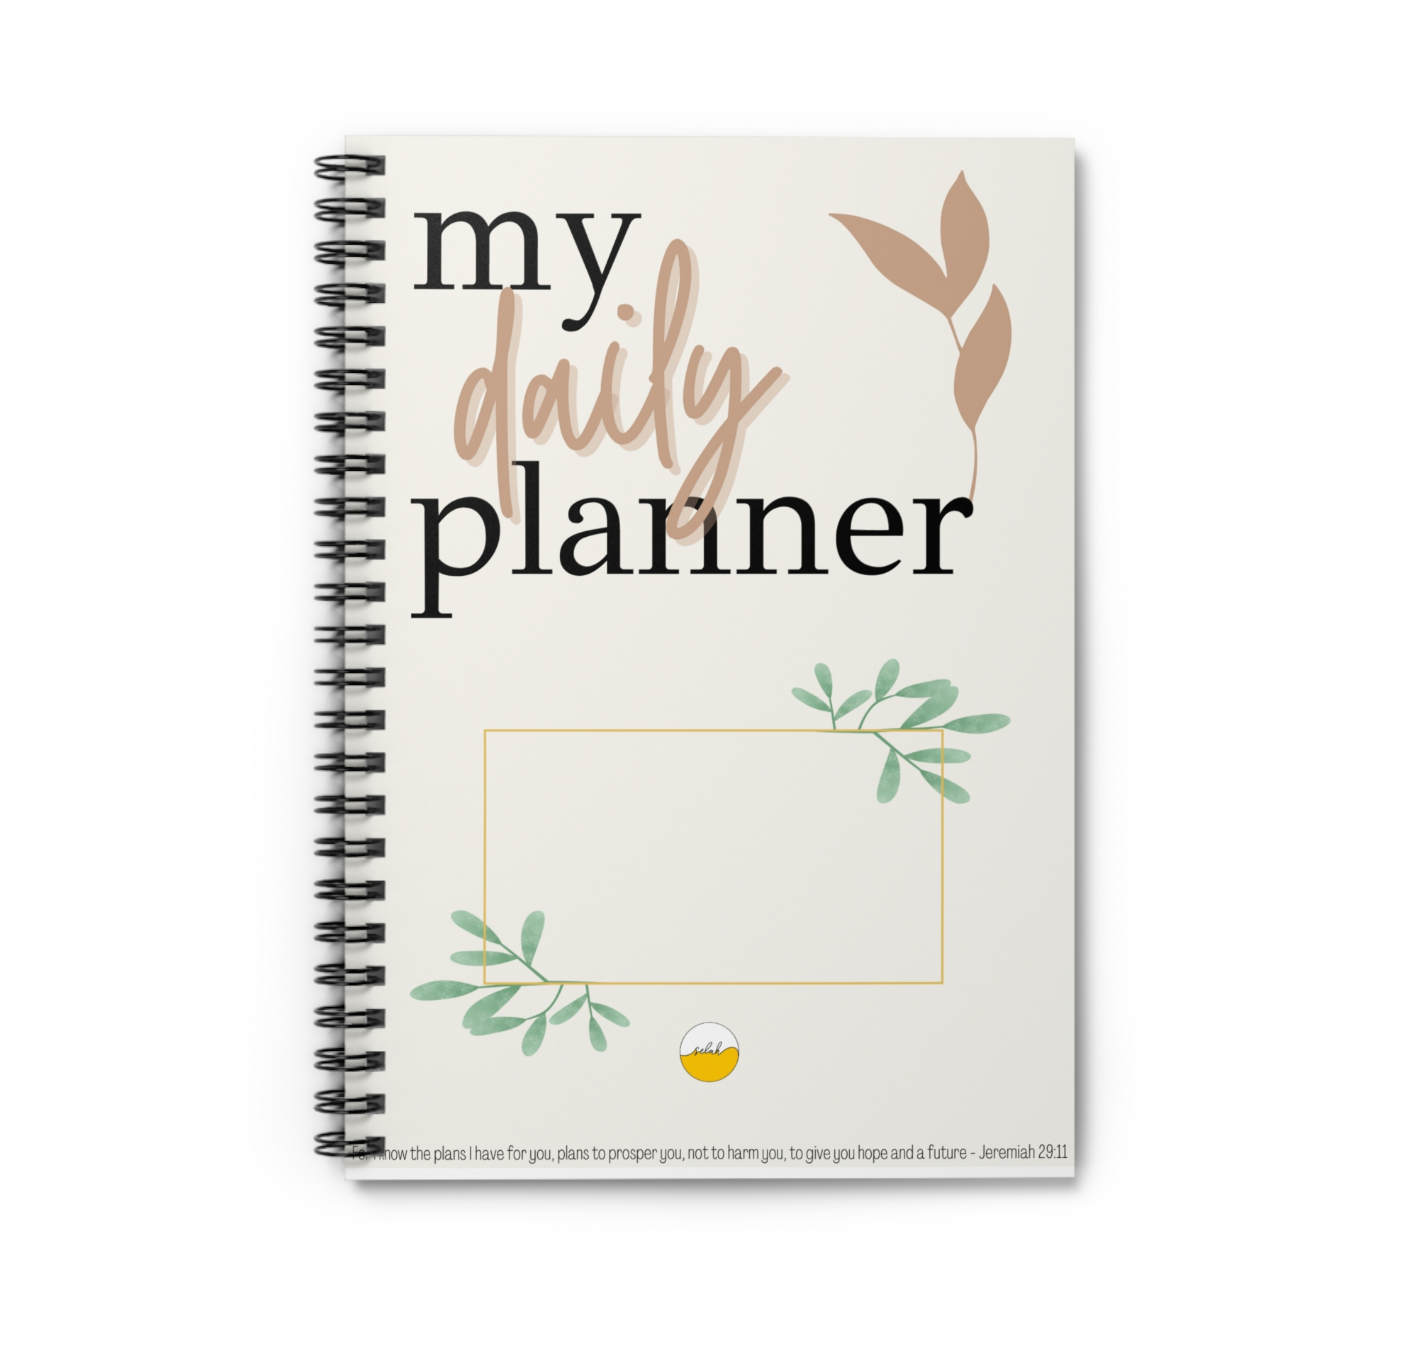 Christian Daily Planner Bundle 11 Pages, Productivity, Finance, Fitness and Life Planner, Printable PDF A4, A5, Selah Planner for Christians